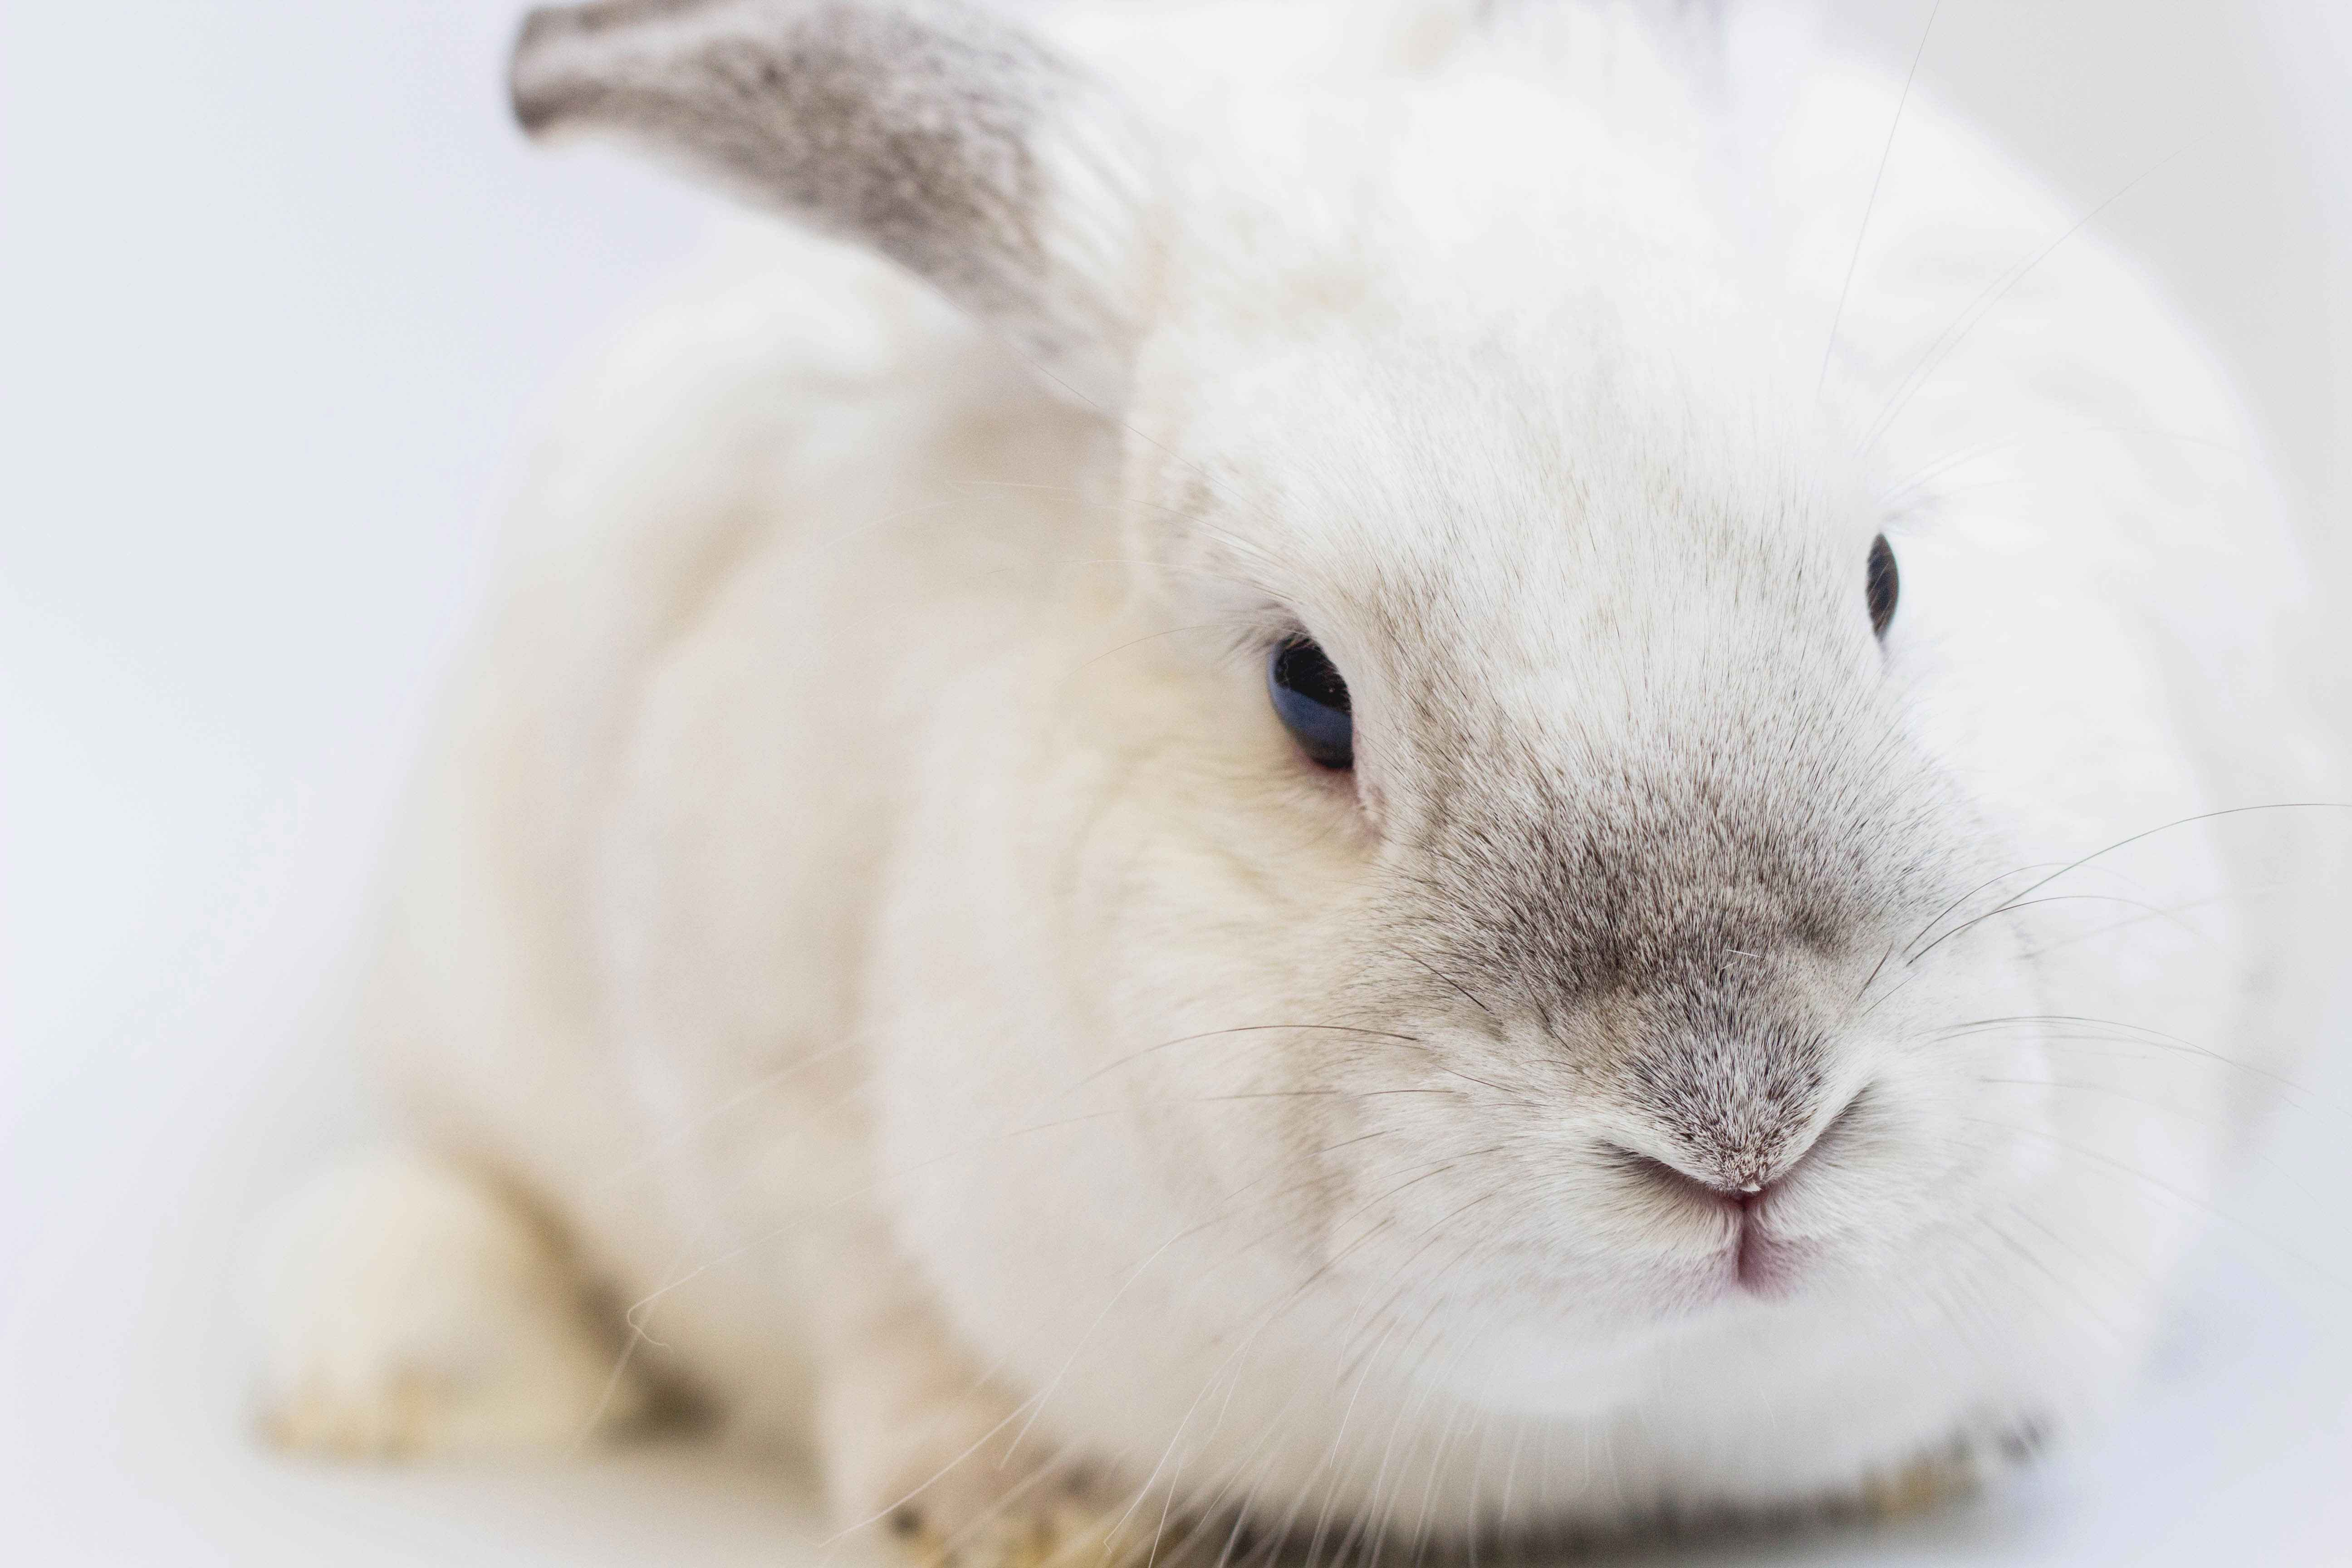 10 Common Signs Your Rabbit is Sick: A Guide to Recognizing Rabbit Health Issues